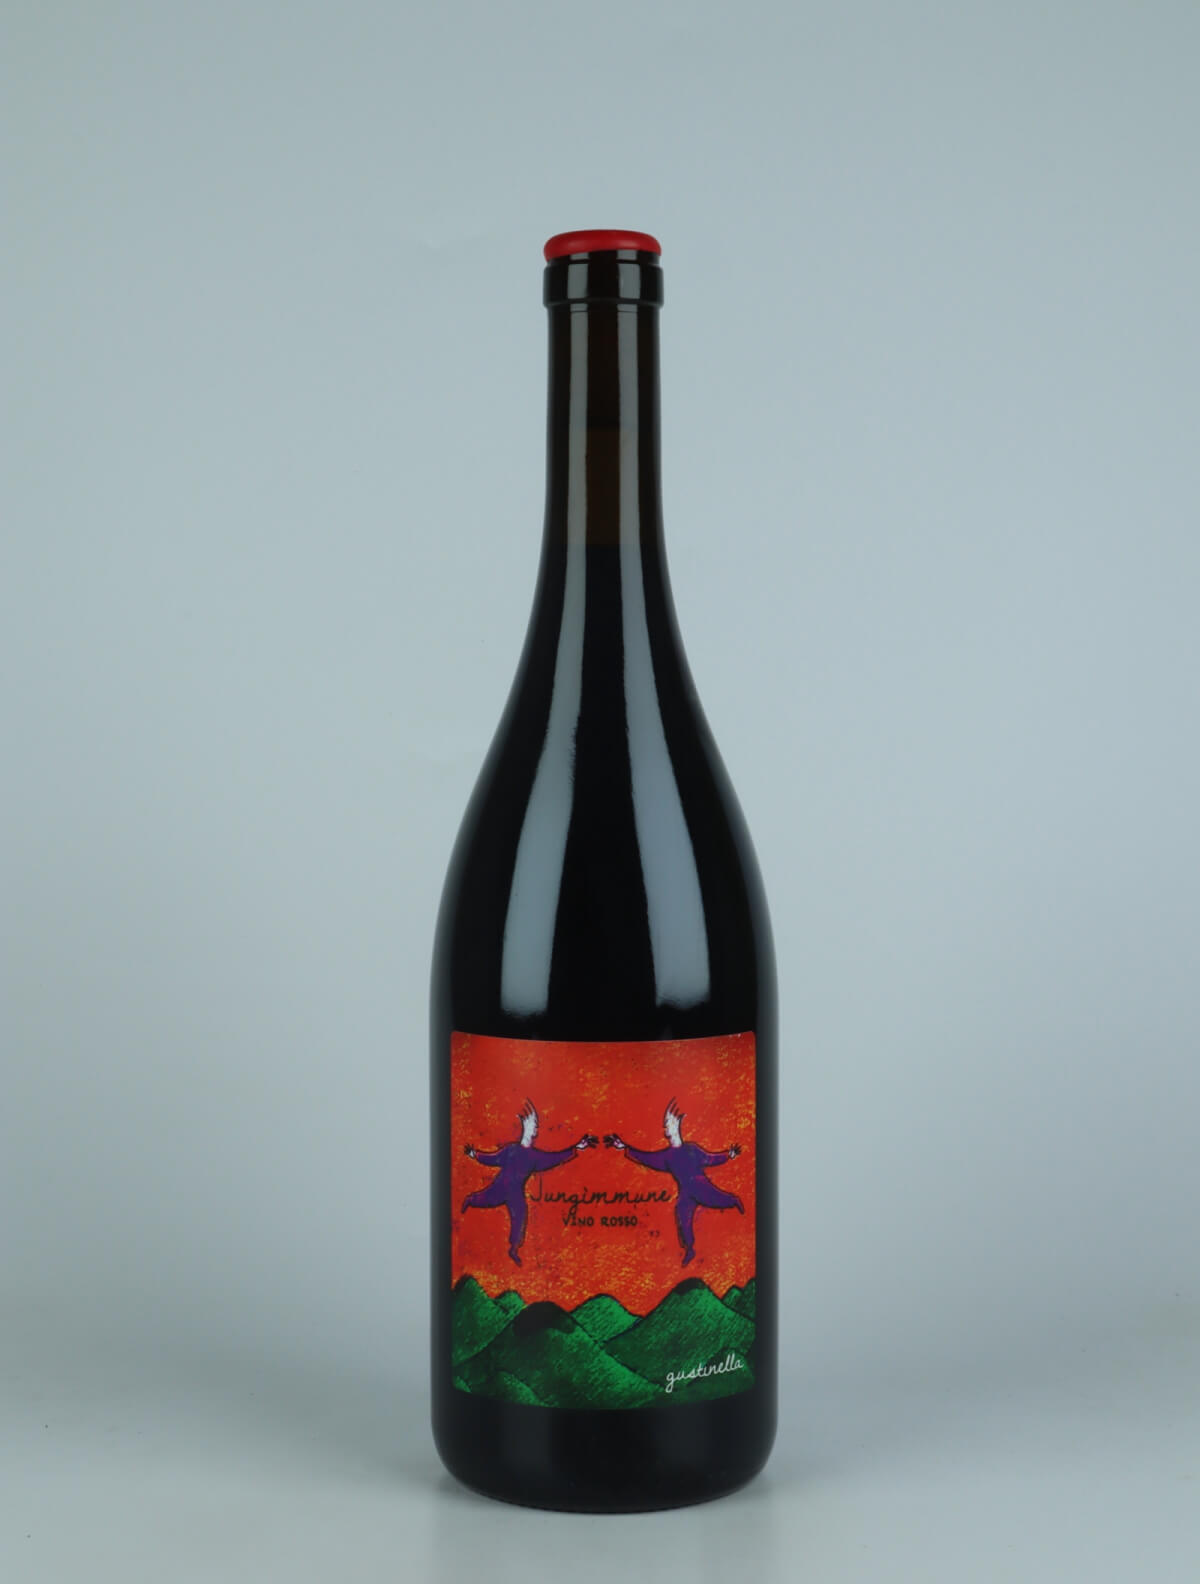 A bottle 2022 Jungimmune Rosso Red wine from Gustinella, Sicily in Italy